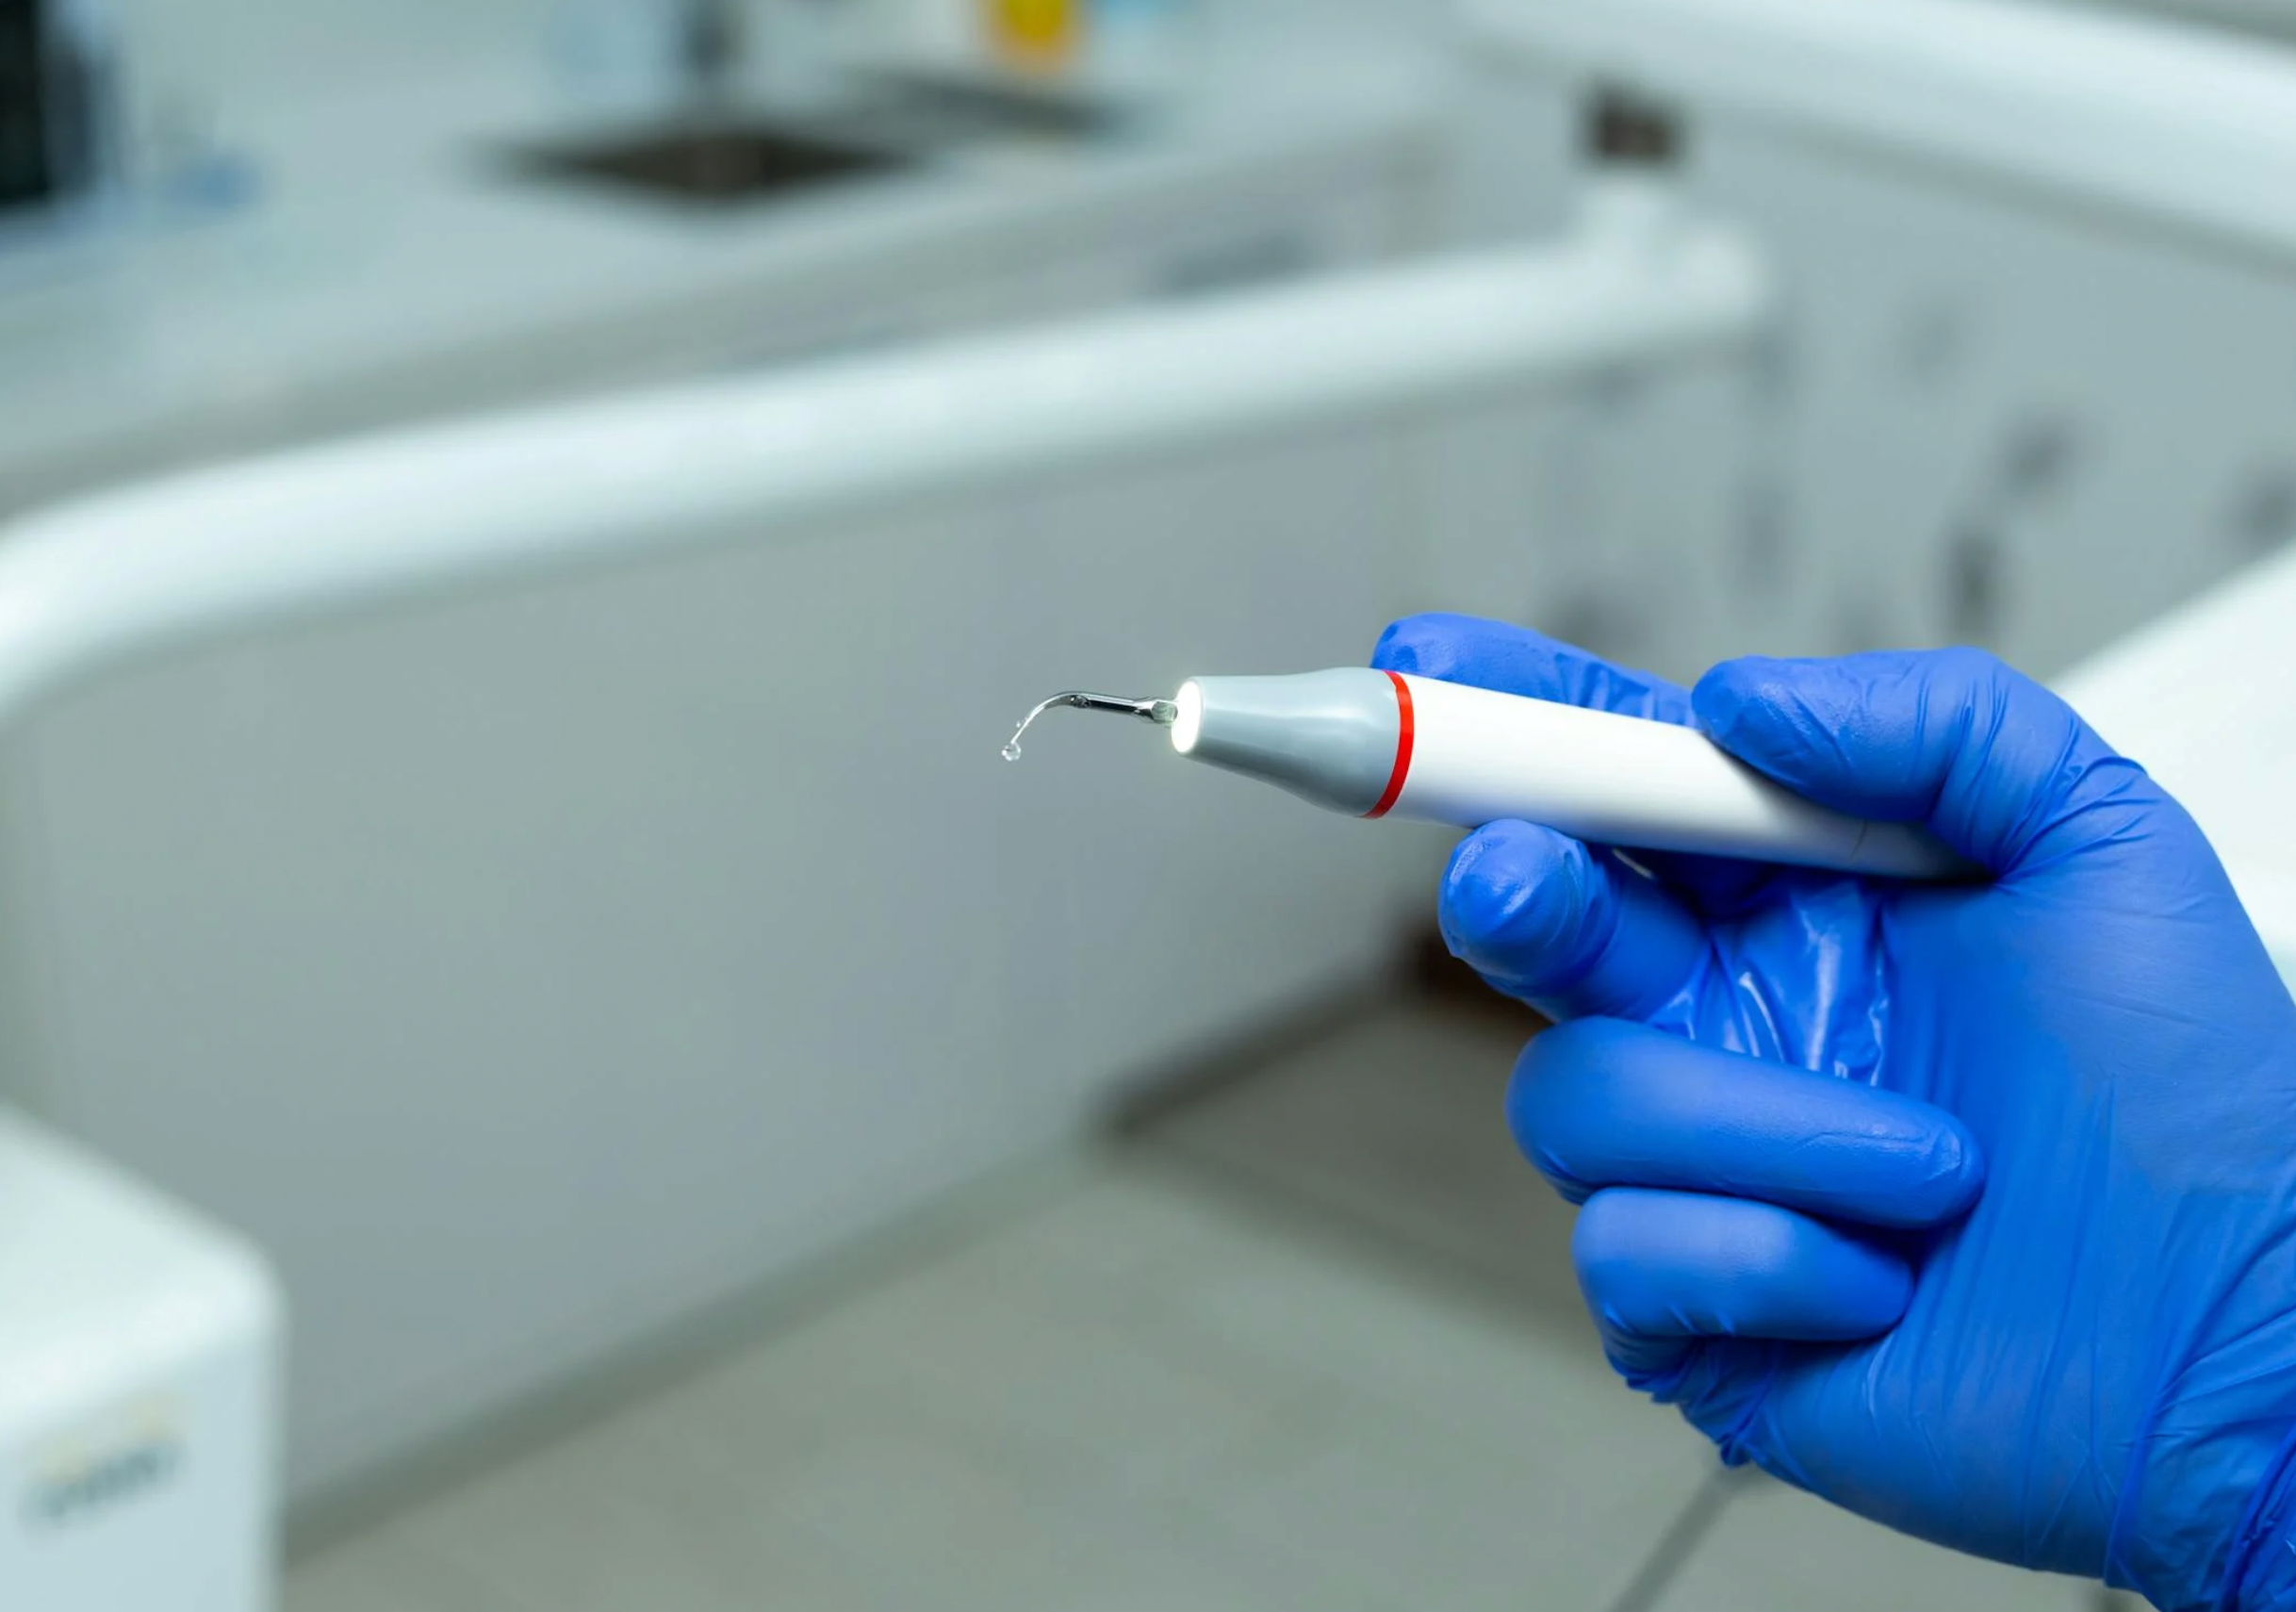 5 Things to Consider Before Pursuing a Career in Dental Hygiene